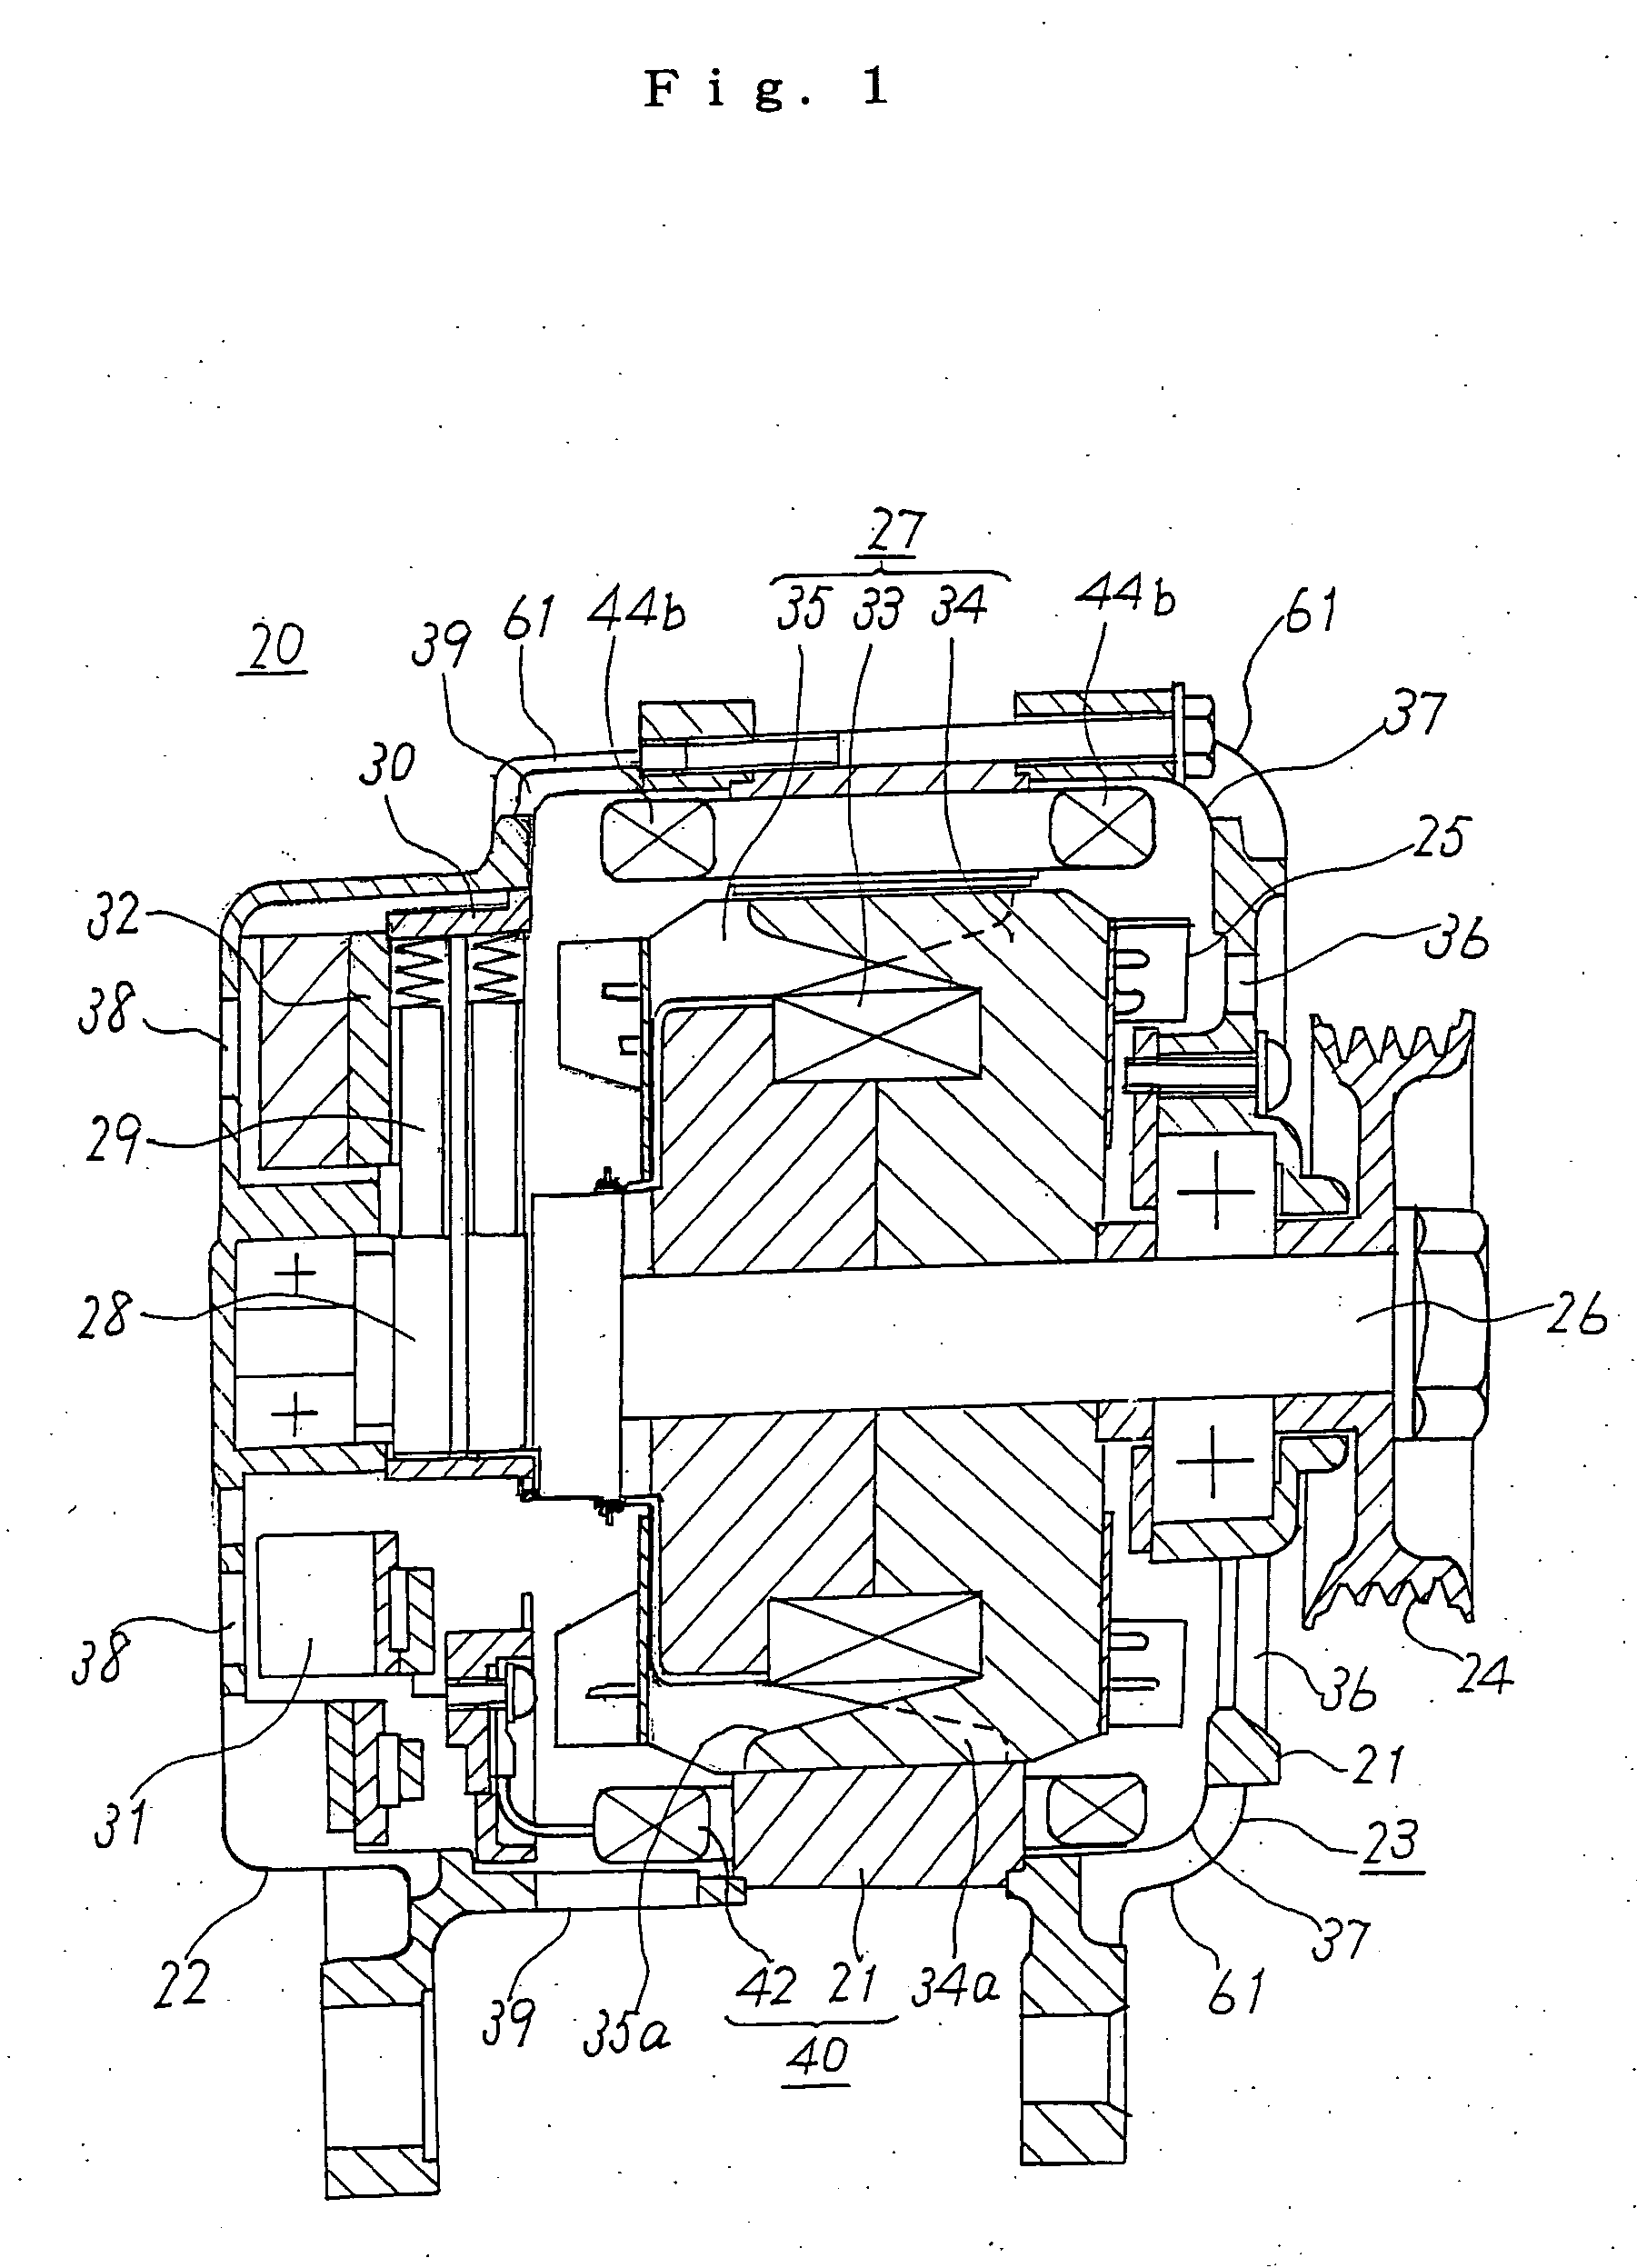 Alternator for a vehicle